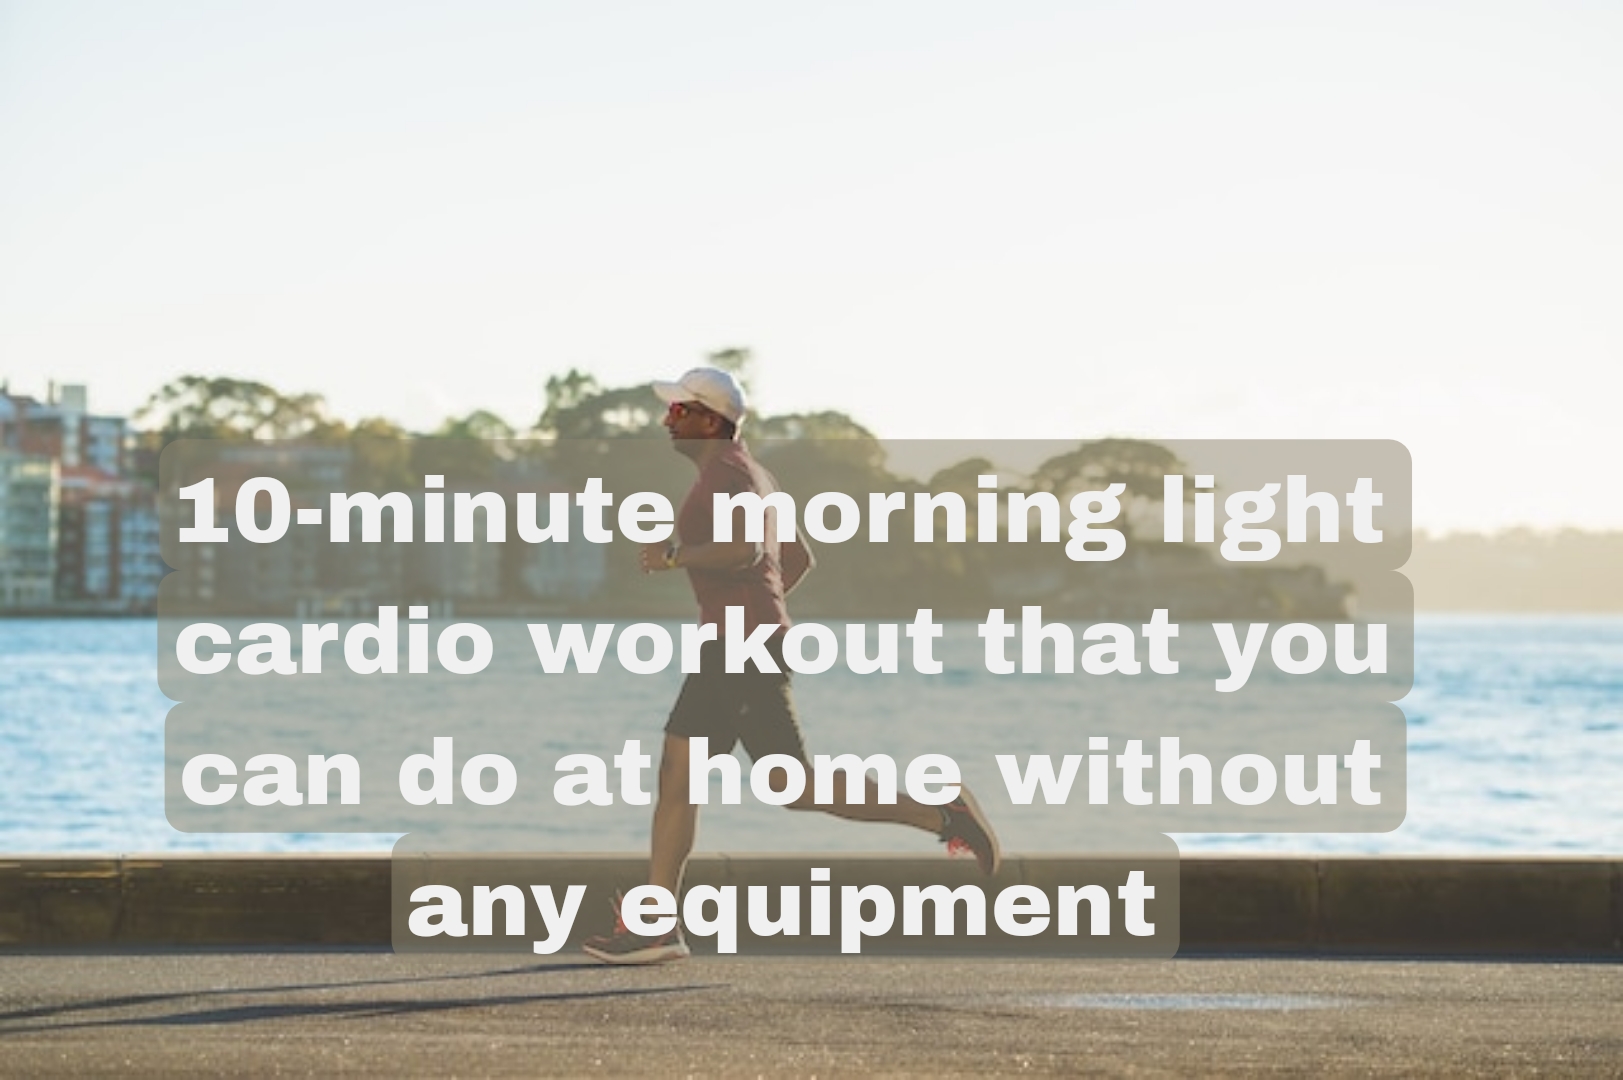 10-minute morning light cardio workout that you can do at home without any equipment